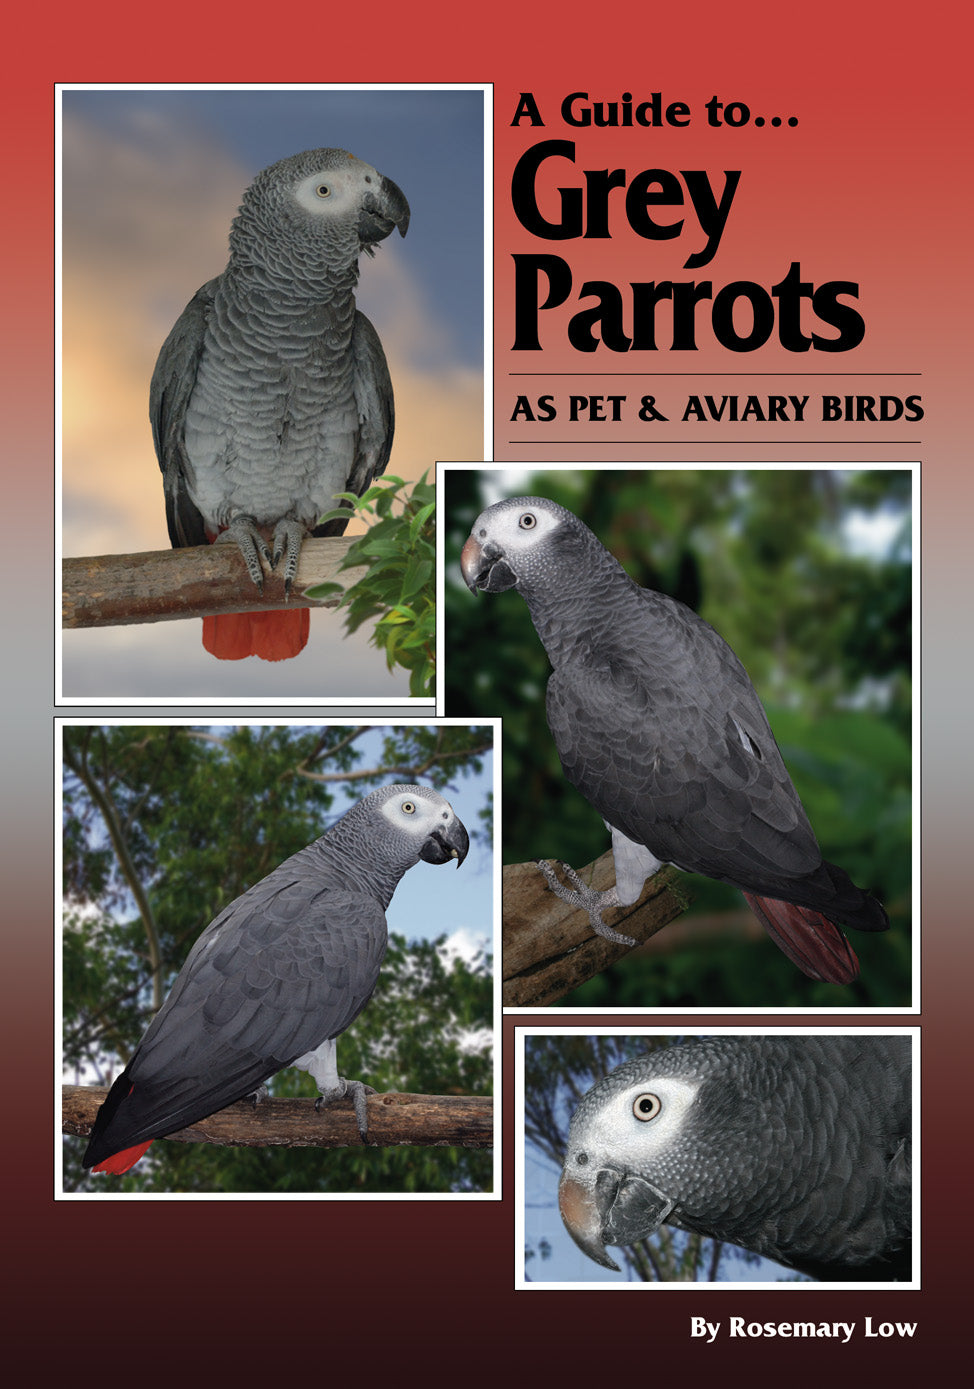 A Guide to Grey Parrots as Pet and Aviary Birds (Hard Cover)